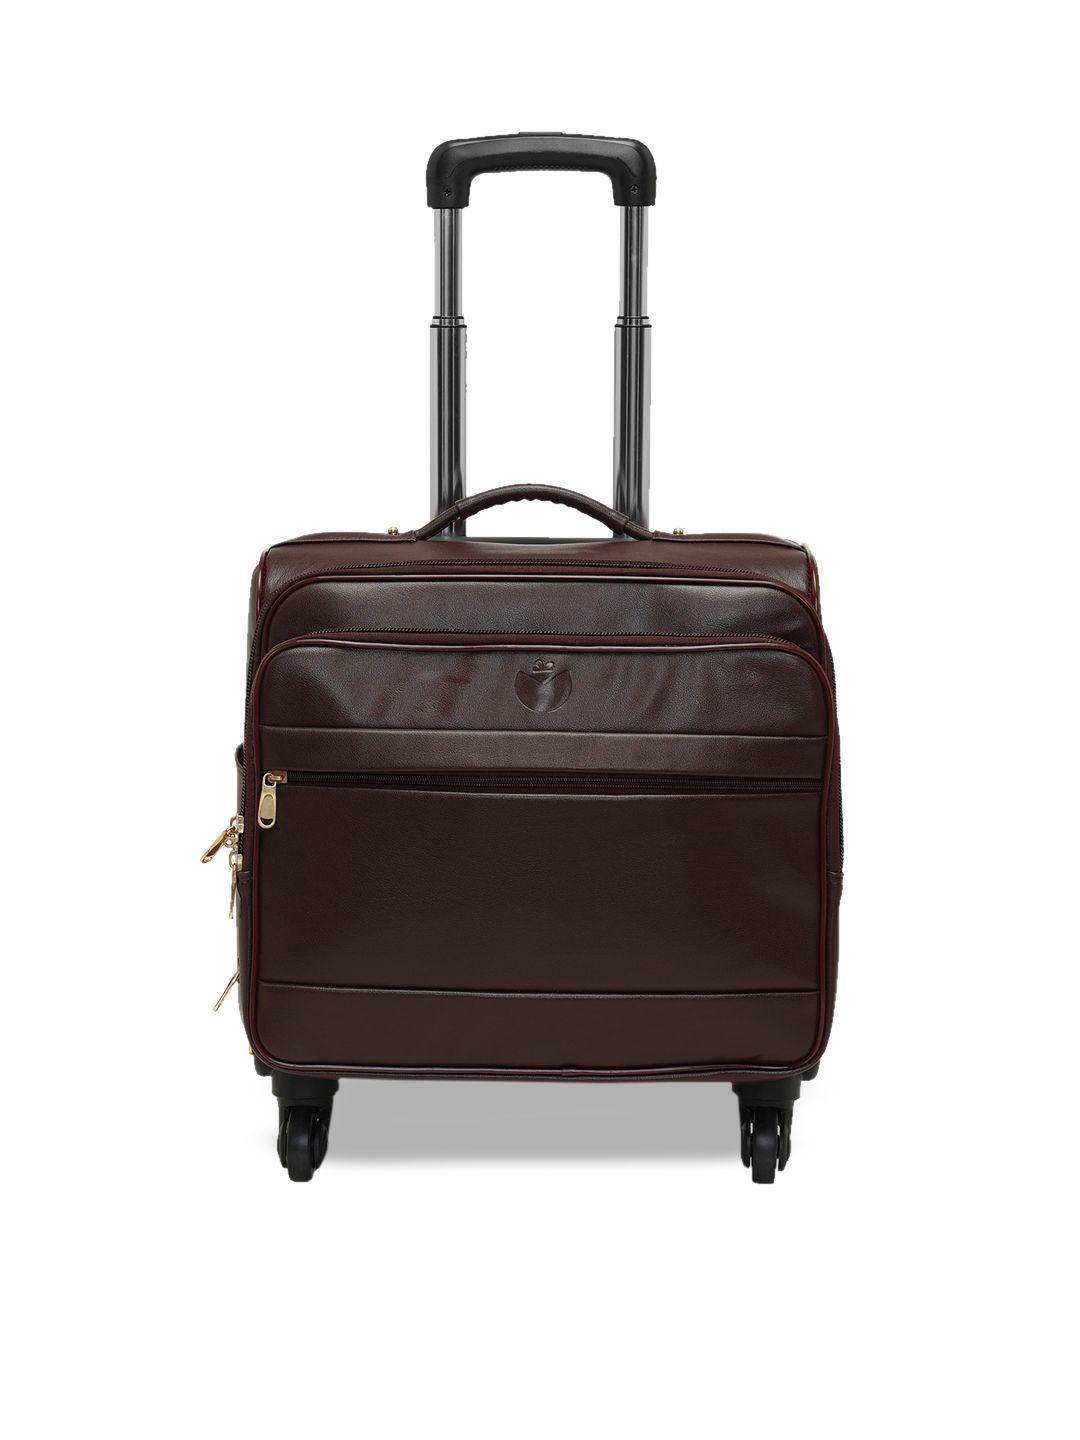 mboss brown solid cabin overnighter trolley suitcase